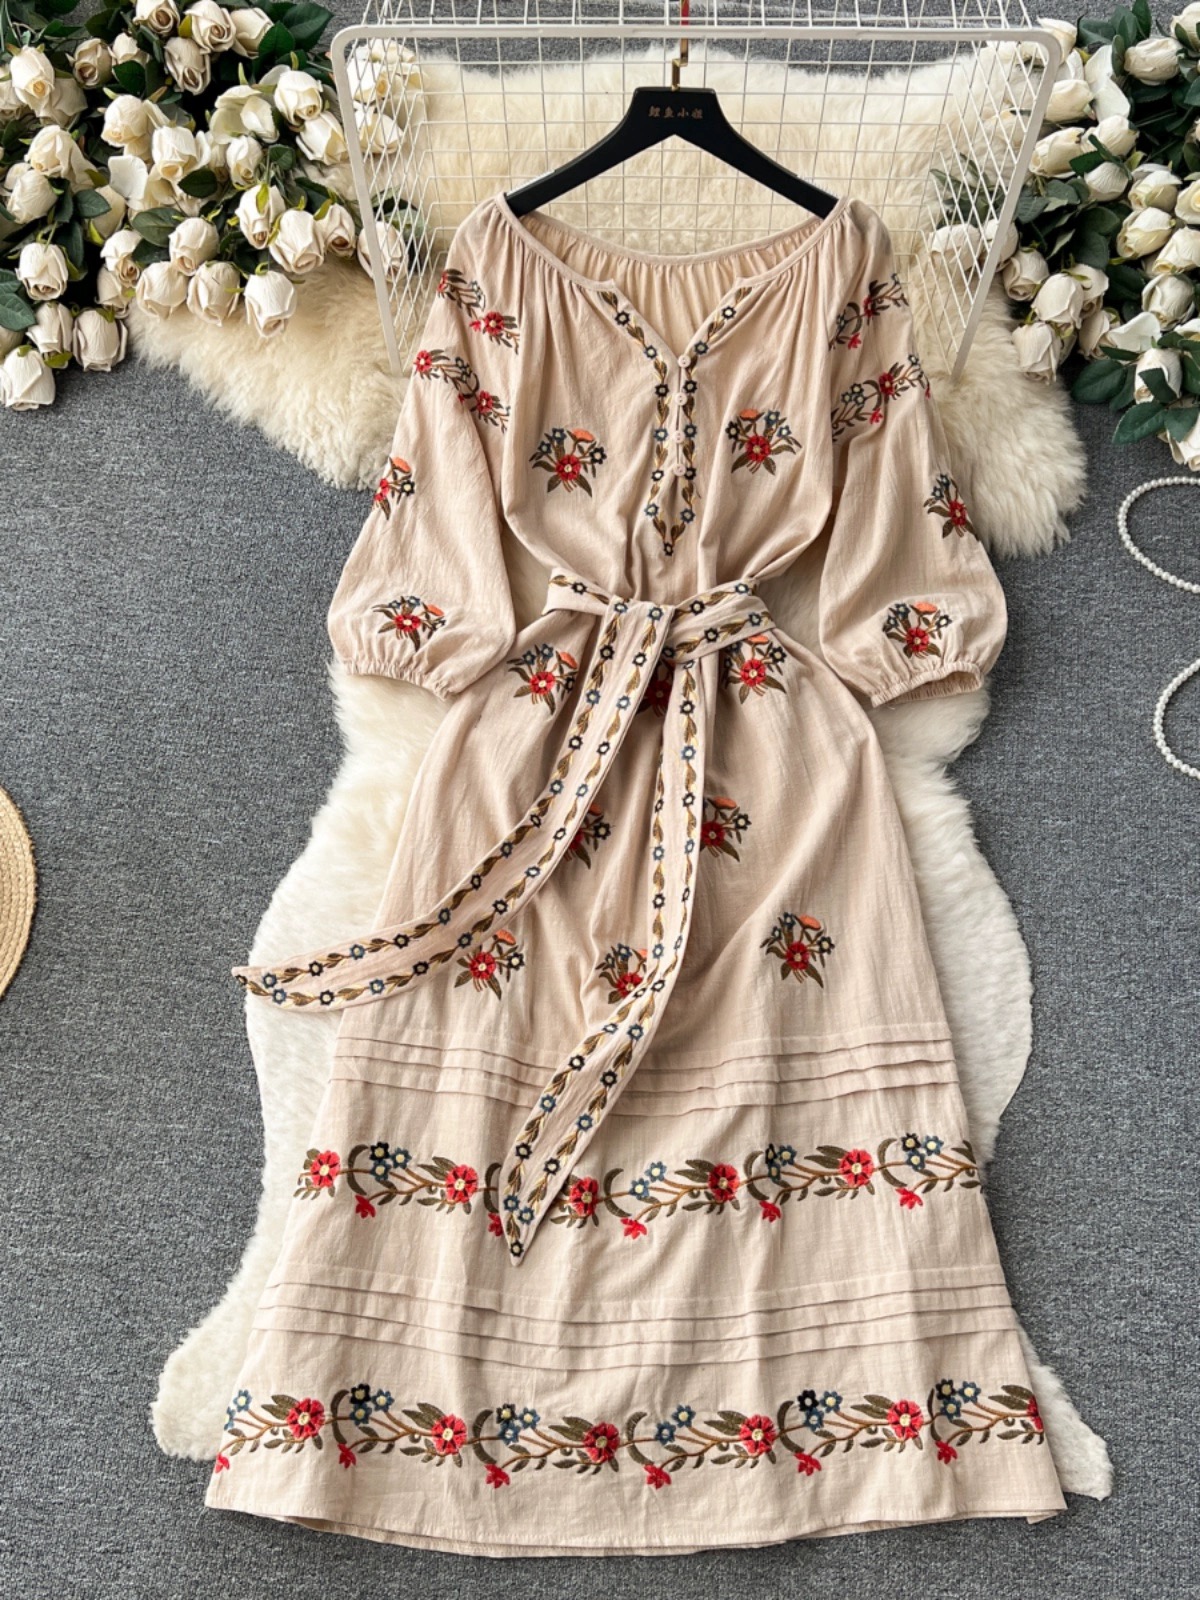 Vintage, Ethnic, Embroidered Puffy Sleeve Dress, Lace-up Waist Slimming Holiday A-line Dress